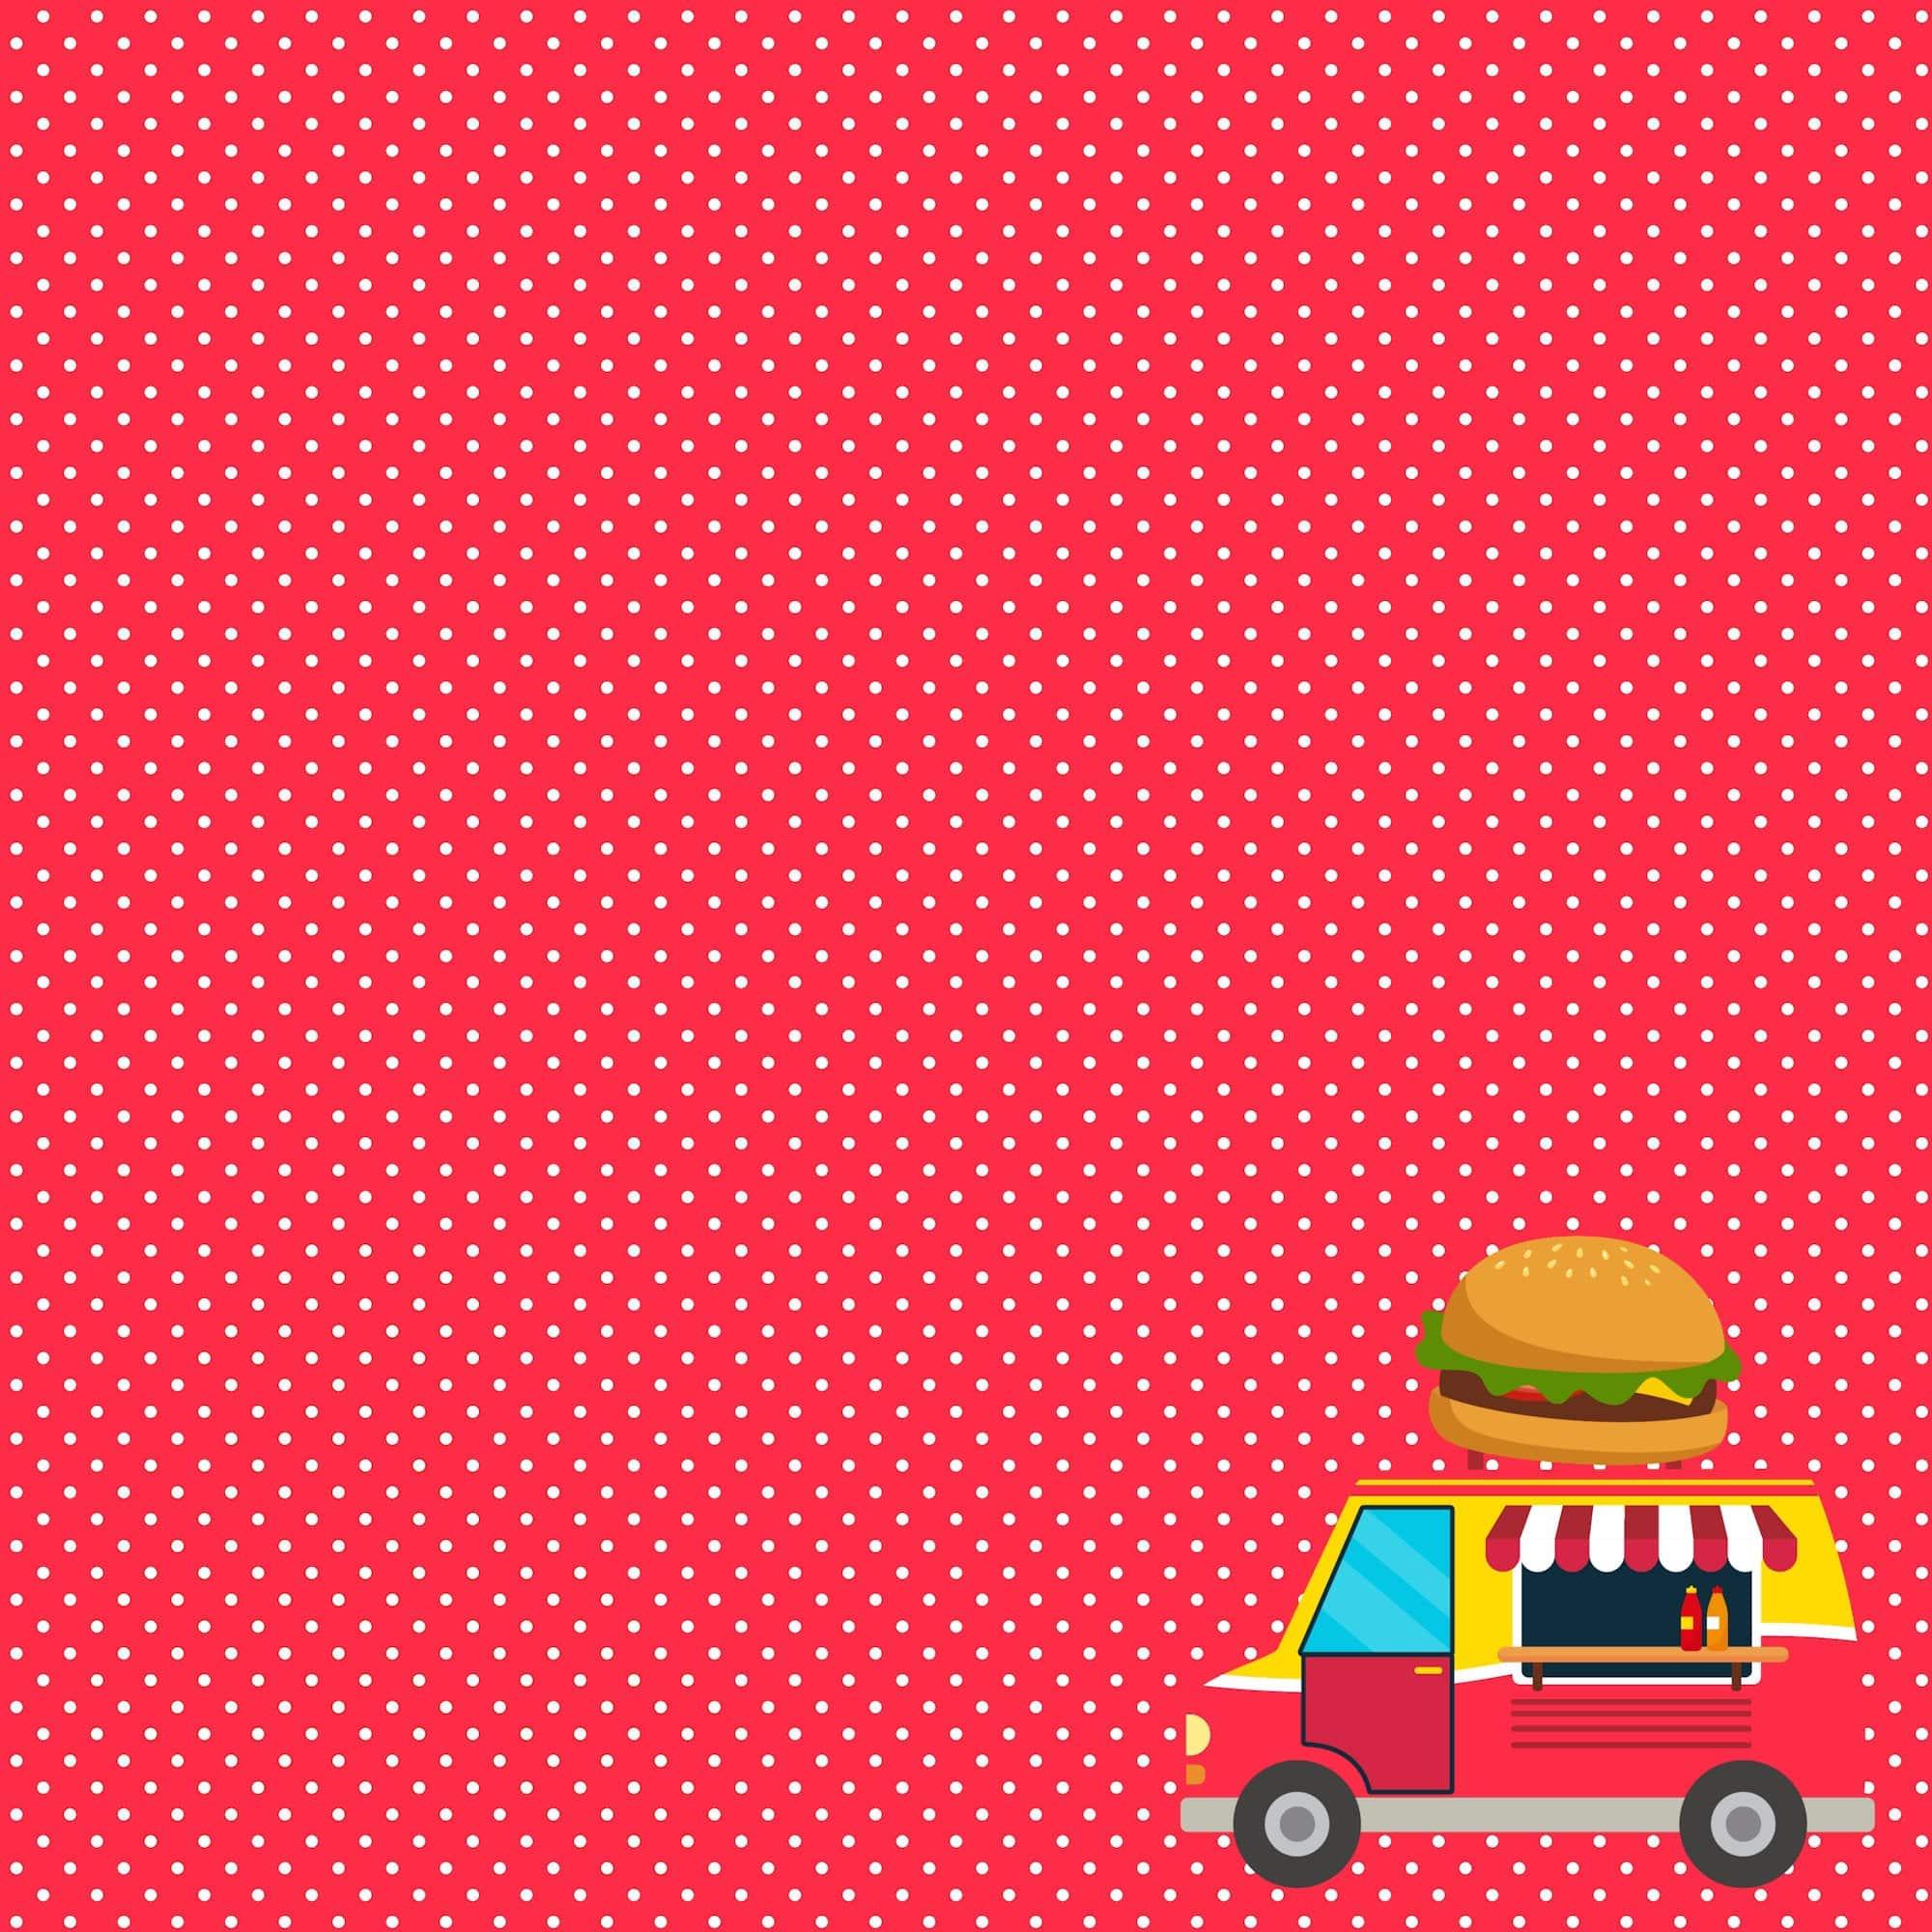 Just Fun Collection Food Truck Fun 12 x 12 Double-Sided Scrapbook Paper by SSC Designs - Scrapbook Supply Companies